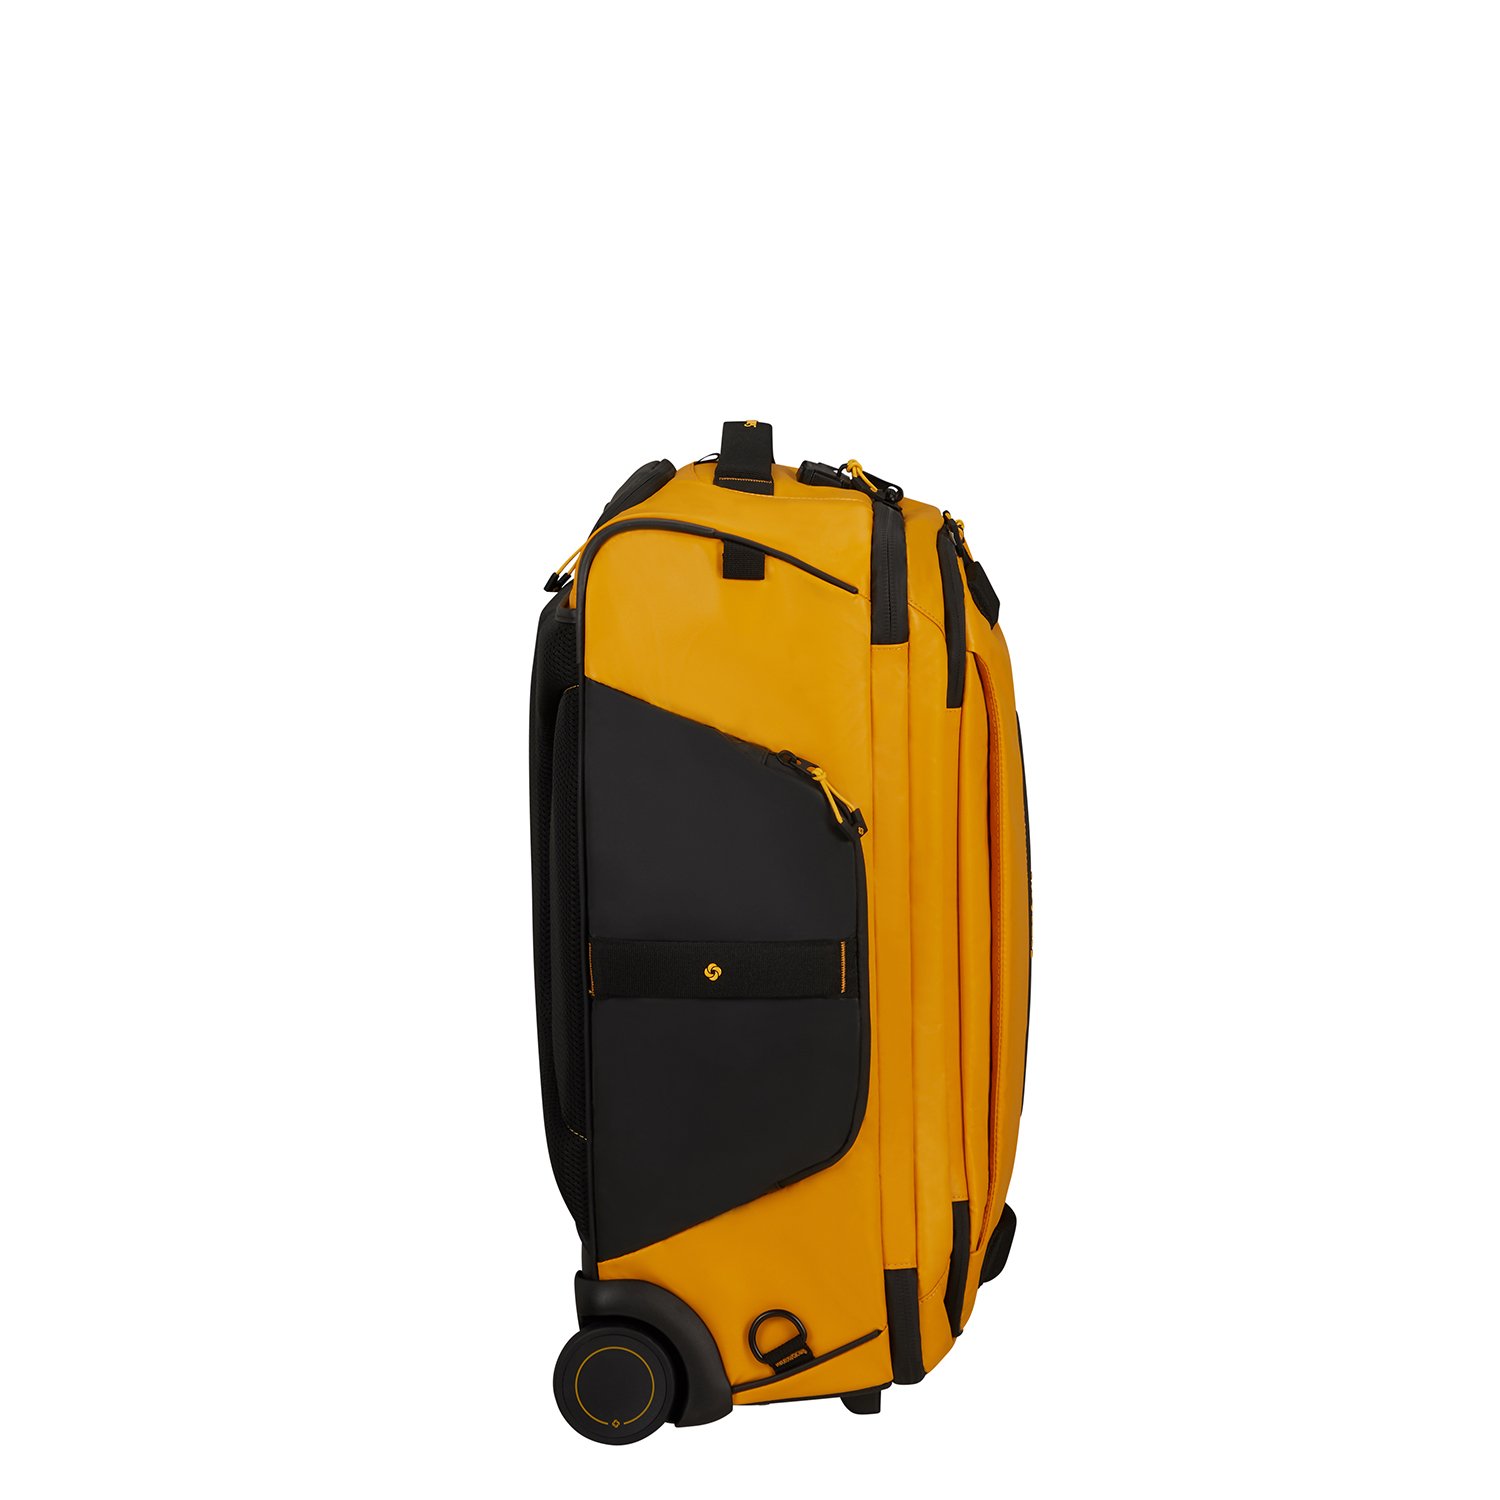 ECODIVER-DUFFLE/WH 55/20 BACKPACK SKH7-012-SF000*06